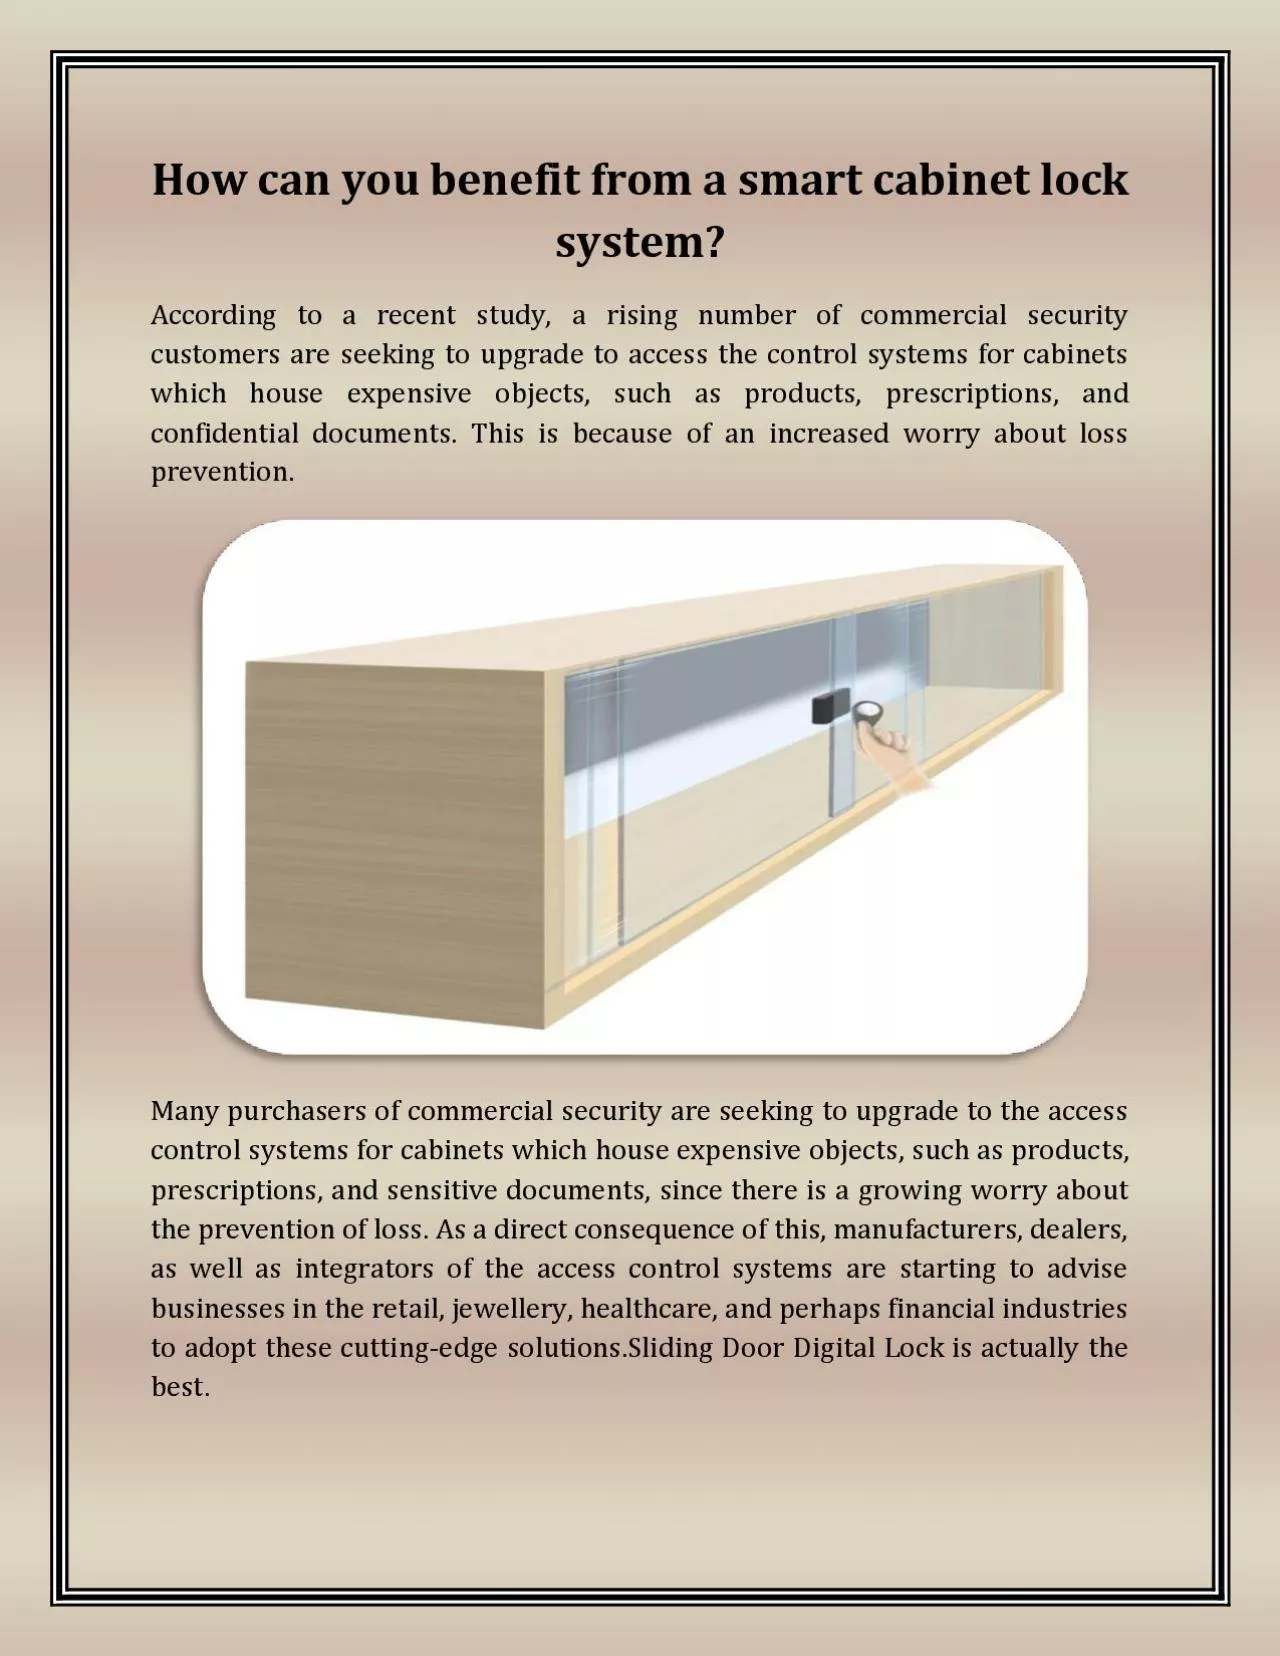 How can you benefit from a smart cabinet lock system?